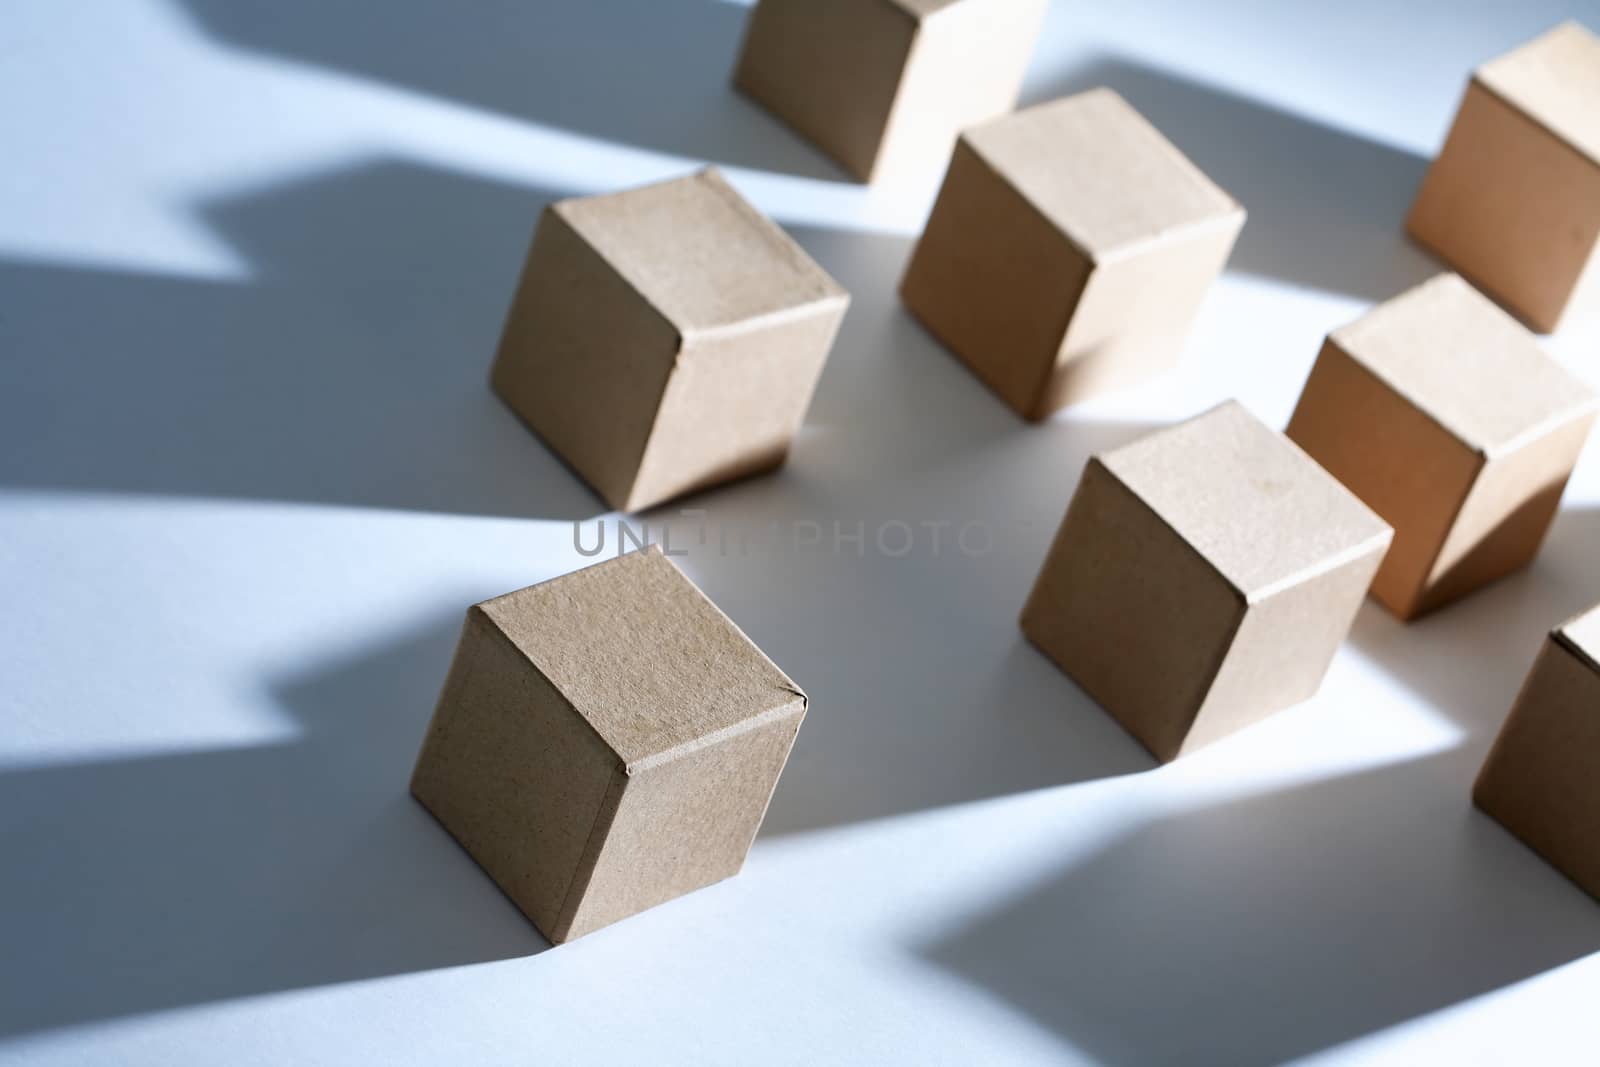 Set of cardboard cubes on white background with light and shadows